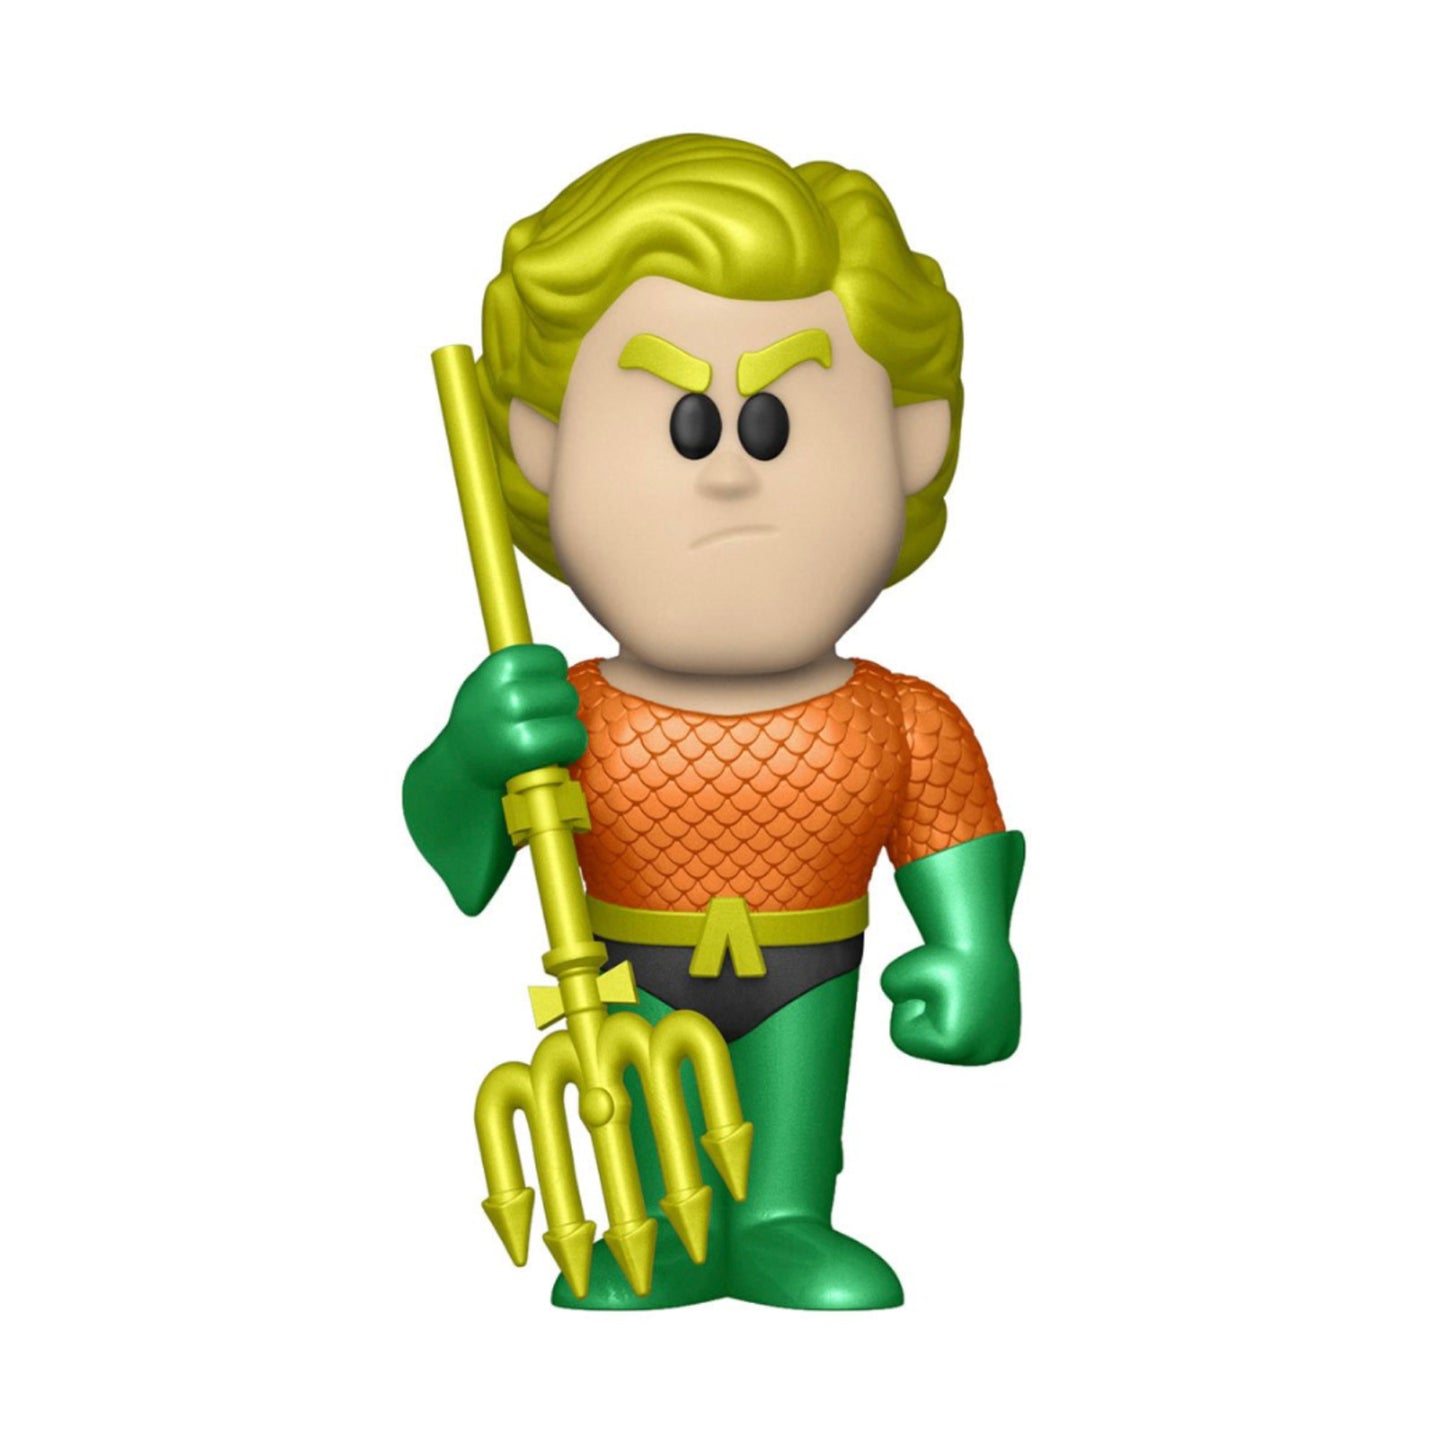 Funko Vinyl SODA: Aquaman 12,500 Limited Edition (1 in 6 Chance at Chase)